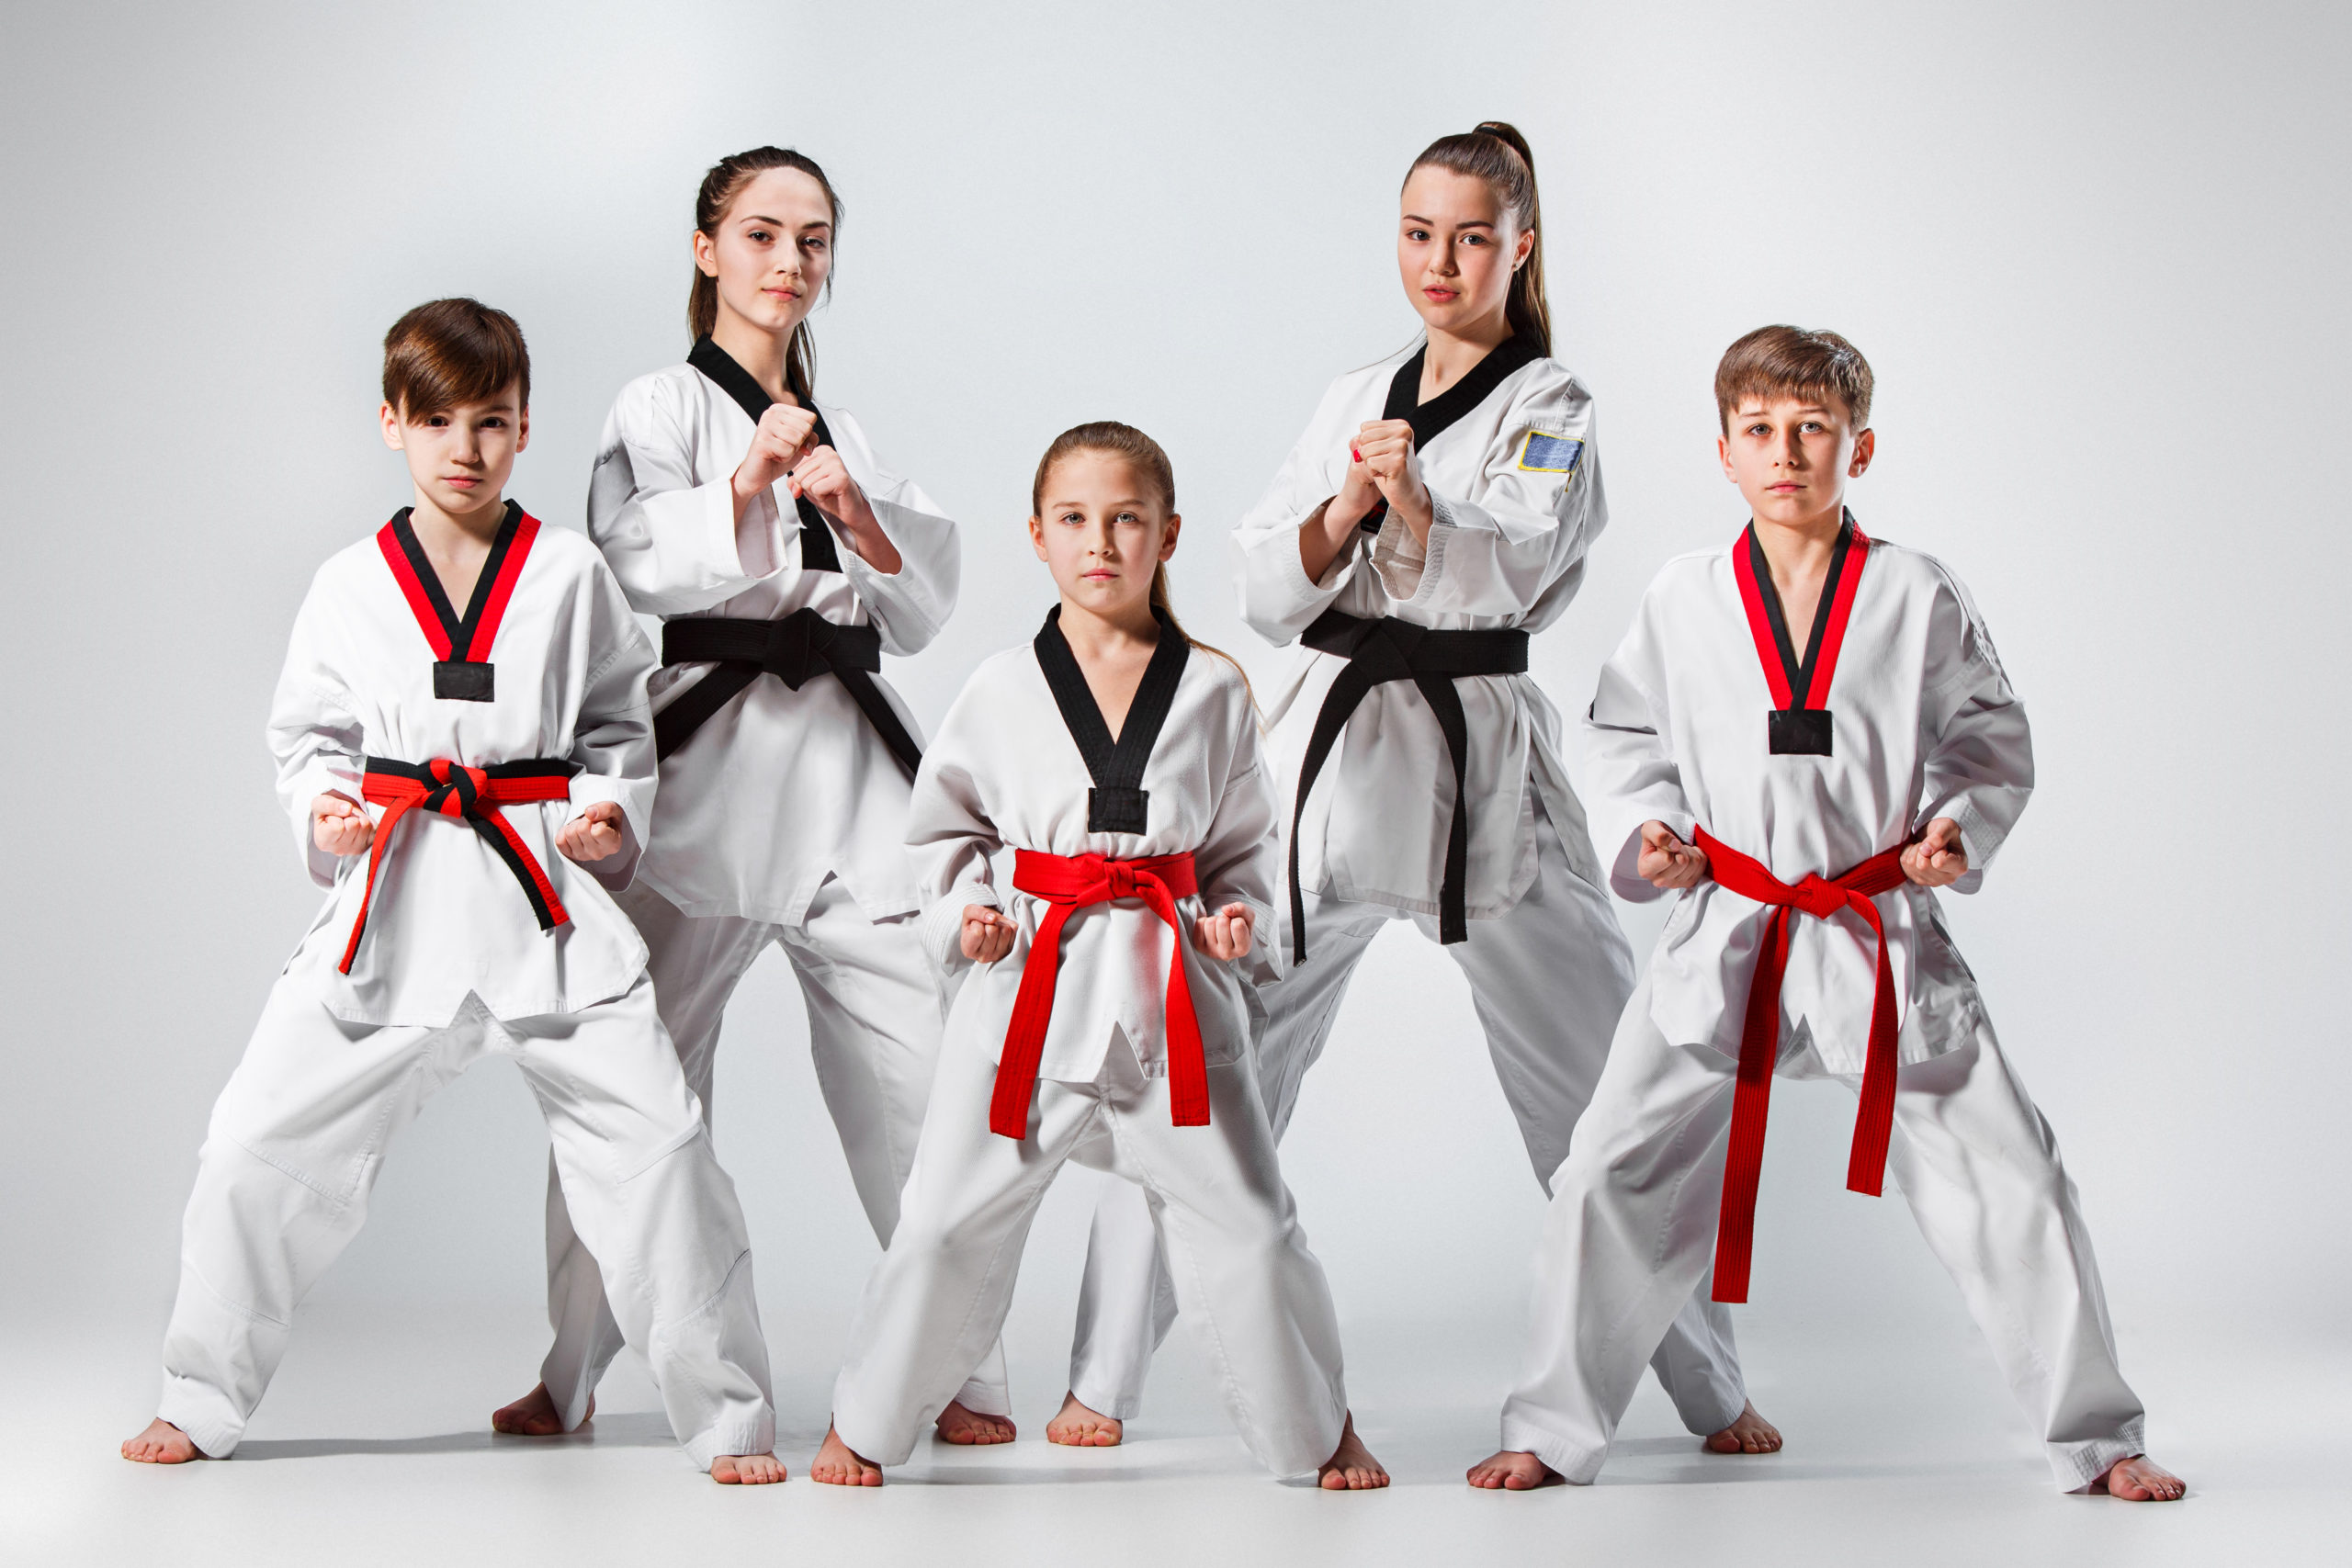 The,Studio,Shot,Of,Group,Of,Kids,Training,Karate,Martial